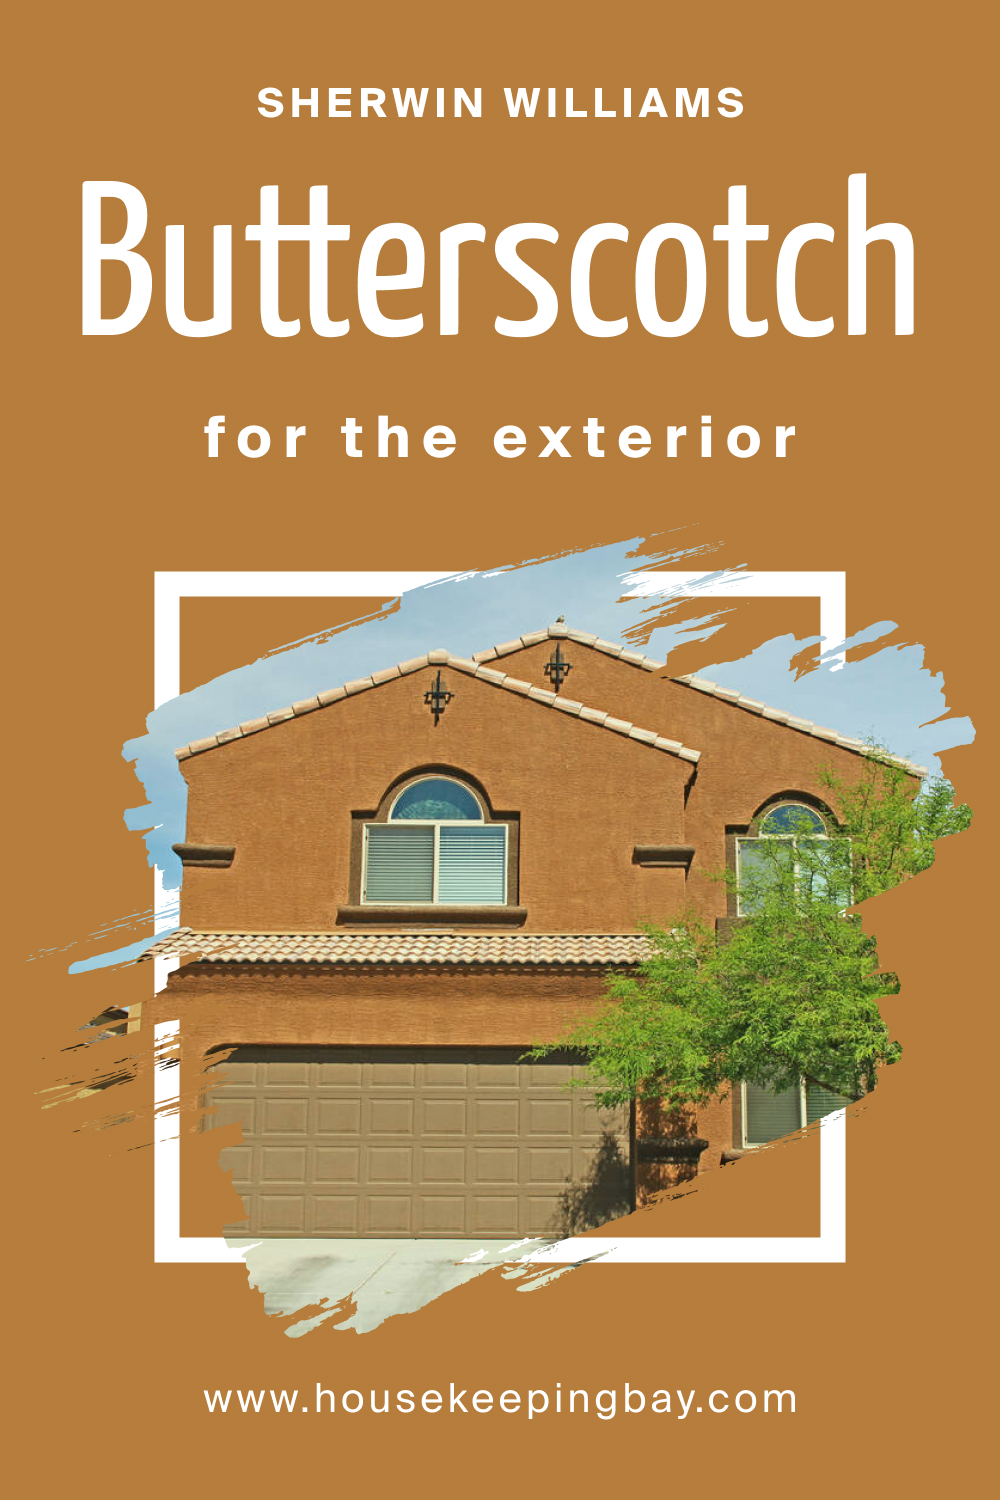 Sherwin Williams. SW 6377 Butterscotch For the exterior